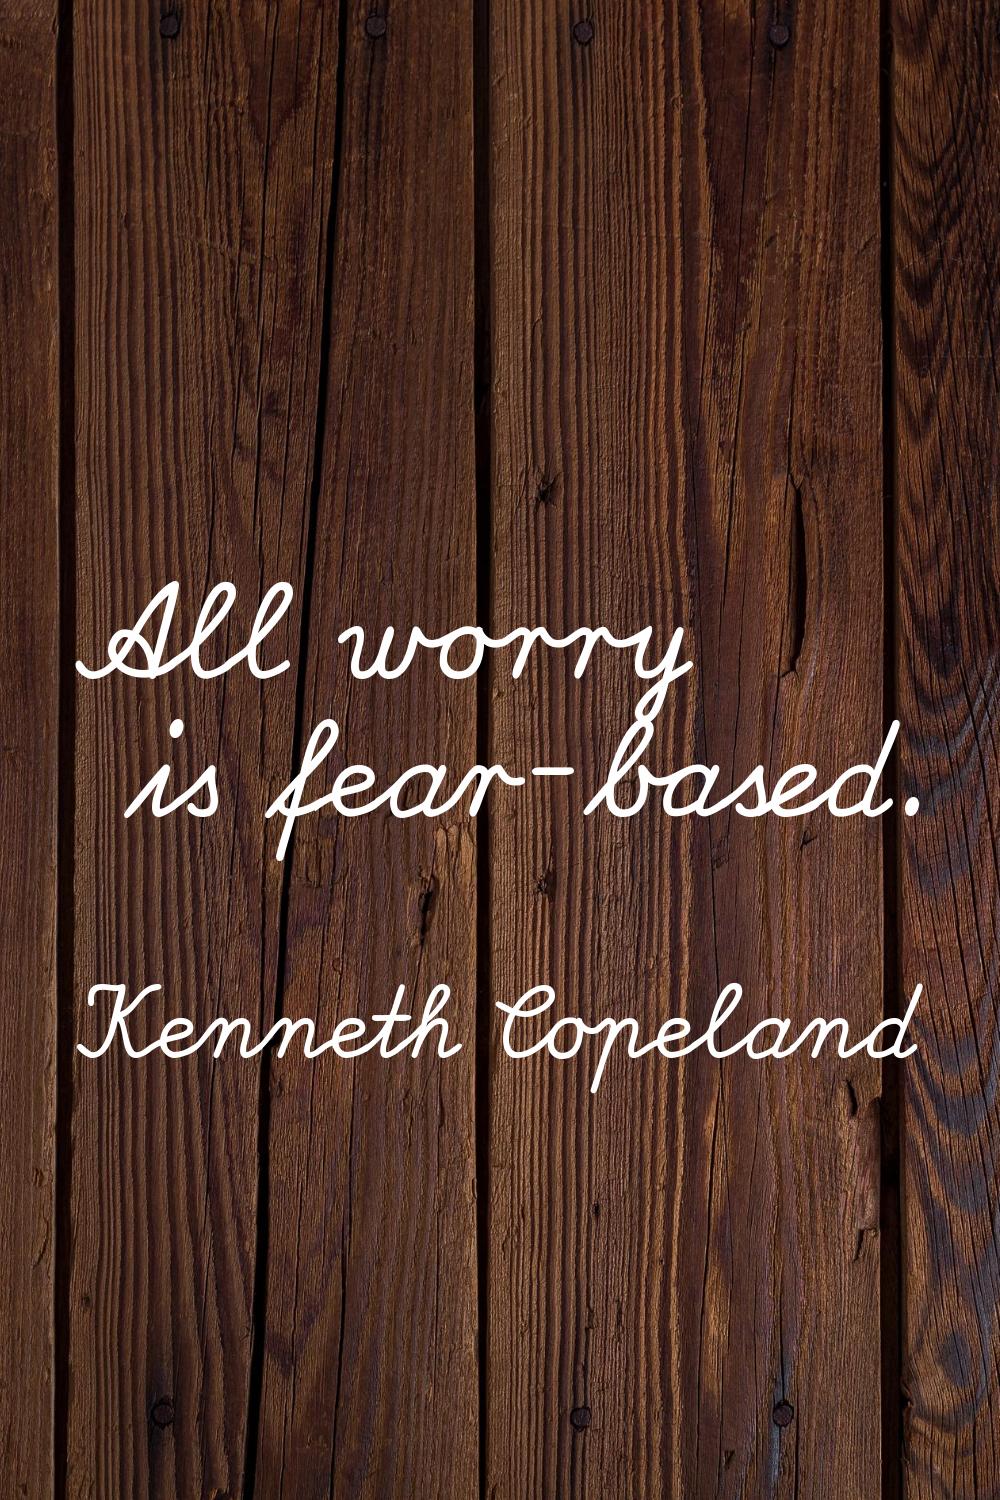 All worry is fear-based.